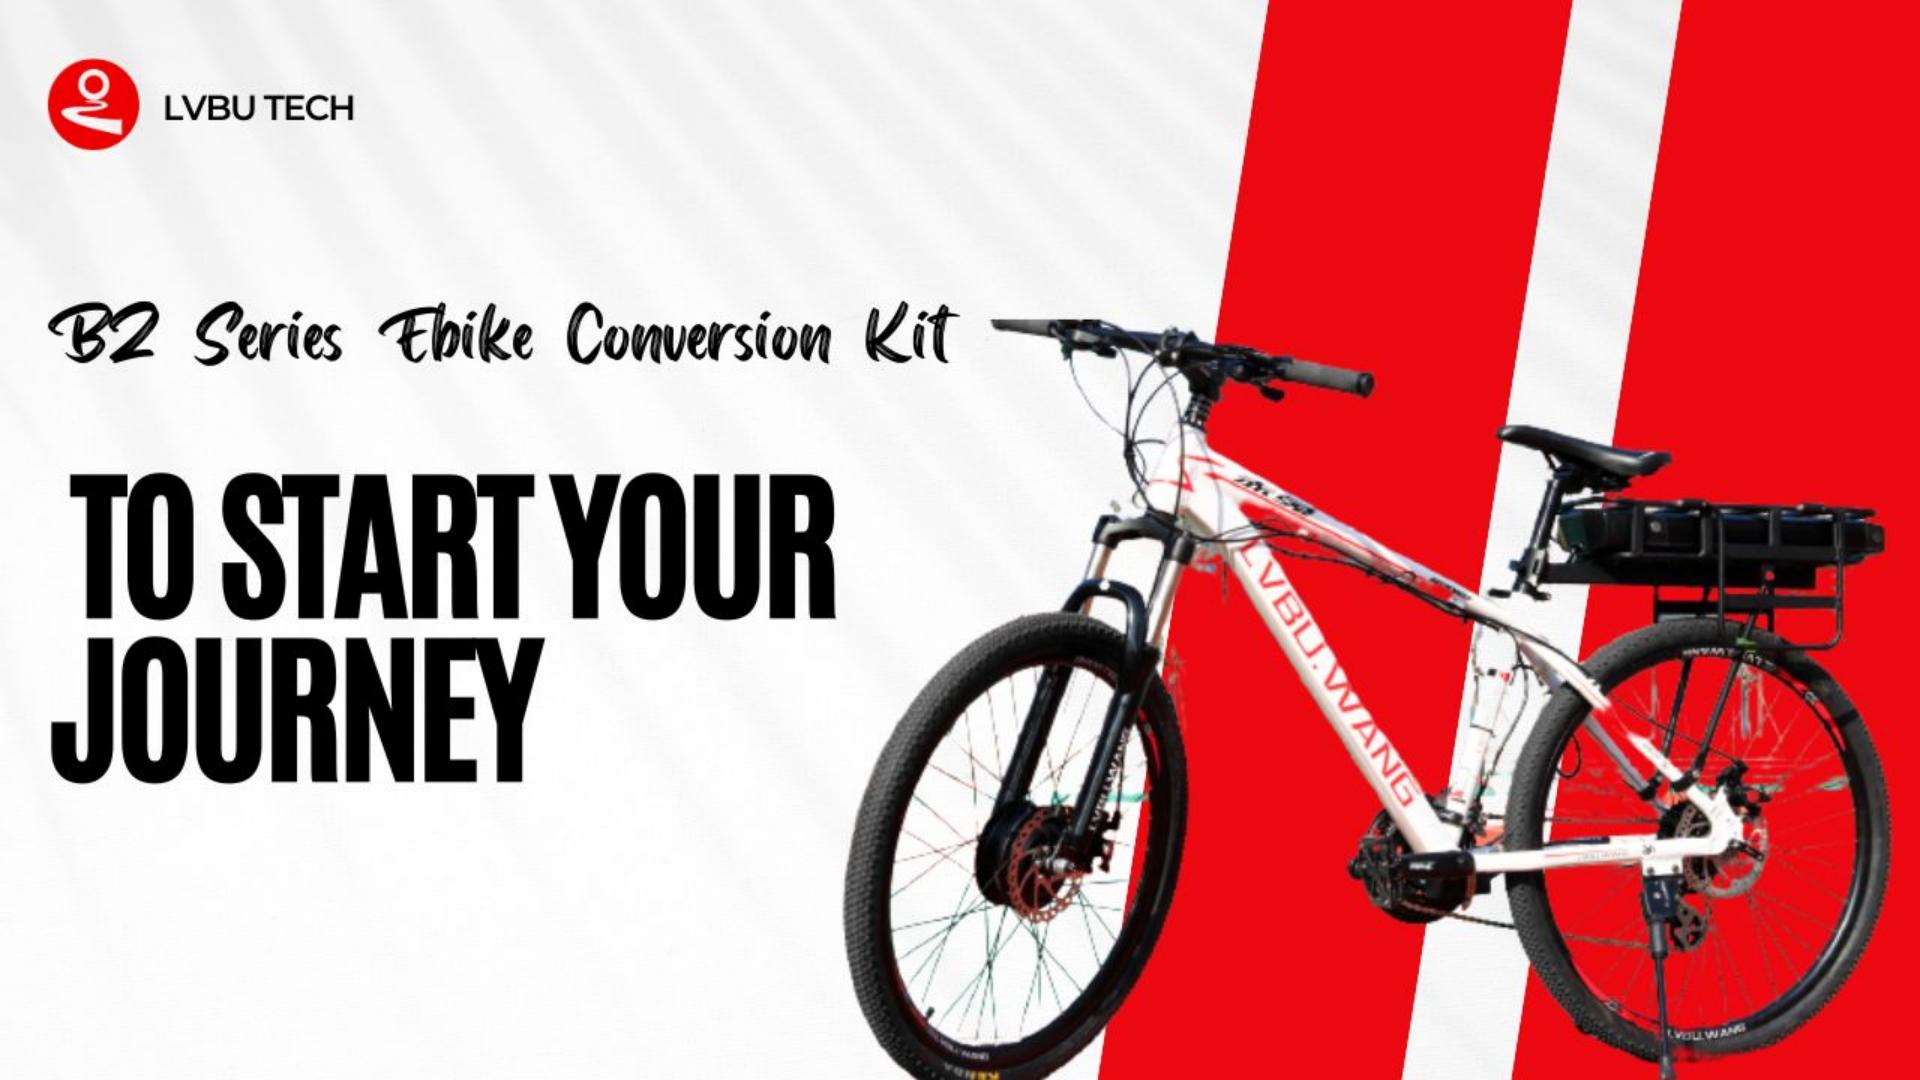 BZ Series Ebike Conversion Kit//A Journey of Happiness, Infinite Possibilities.